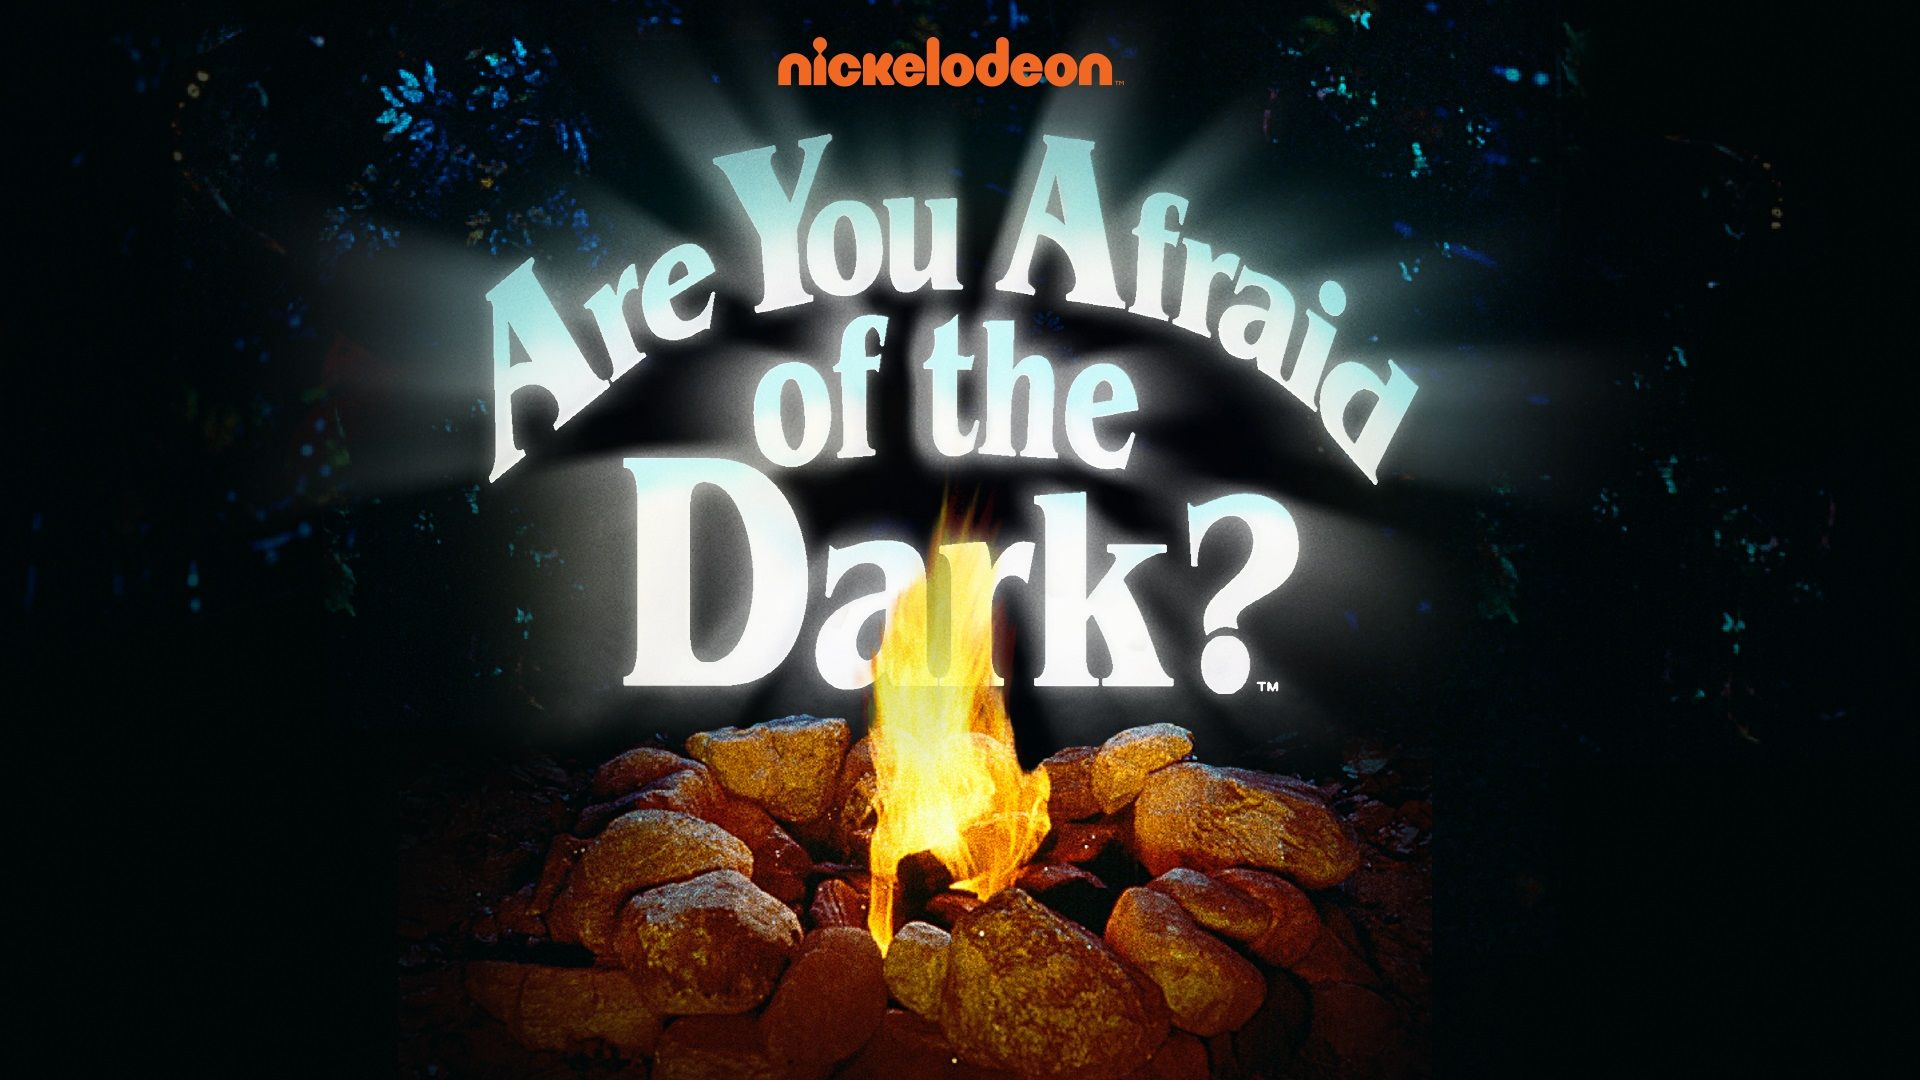 The title screen of Nickelodeon's horror anthology series Are You Afraid of the Dark.